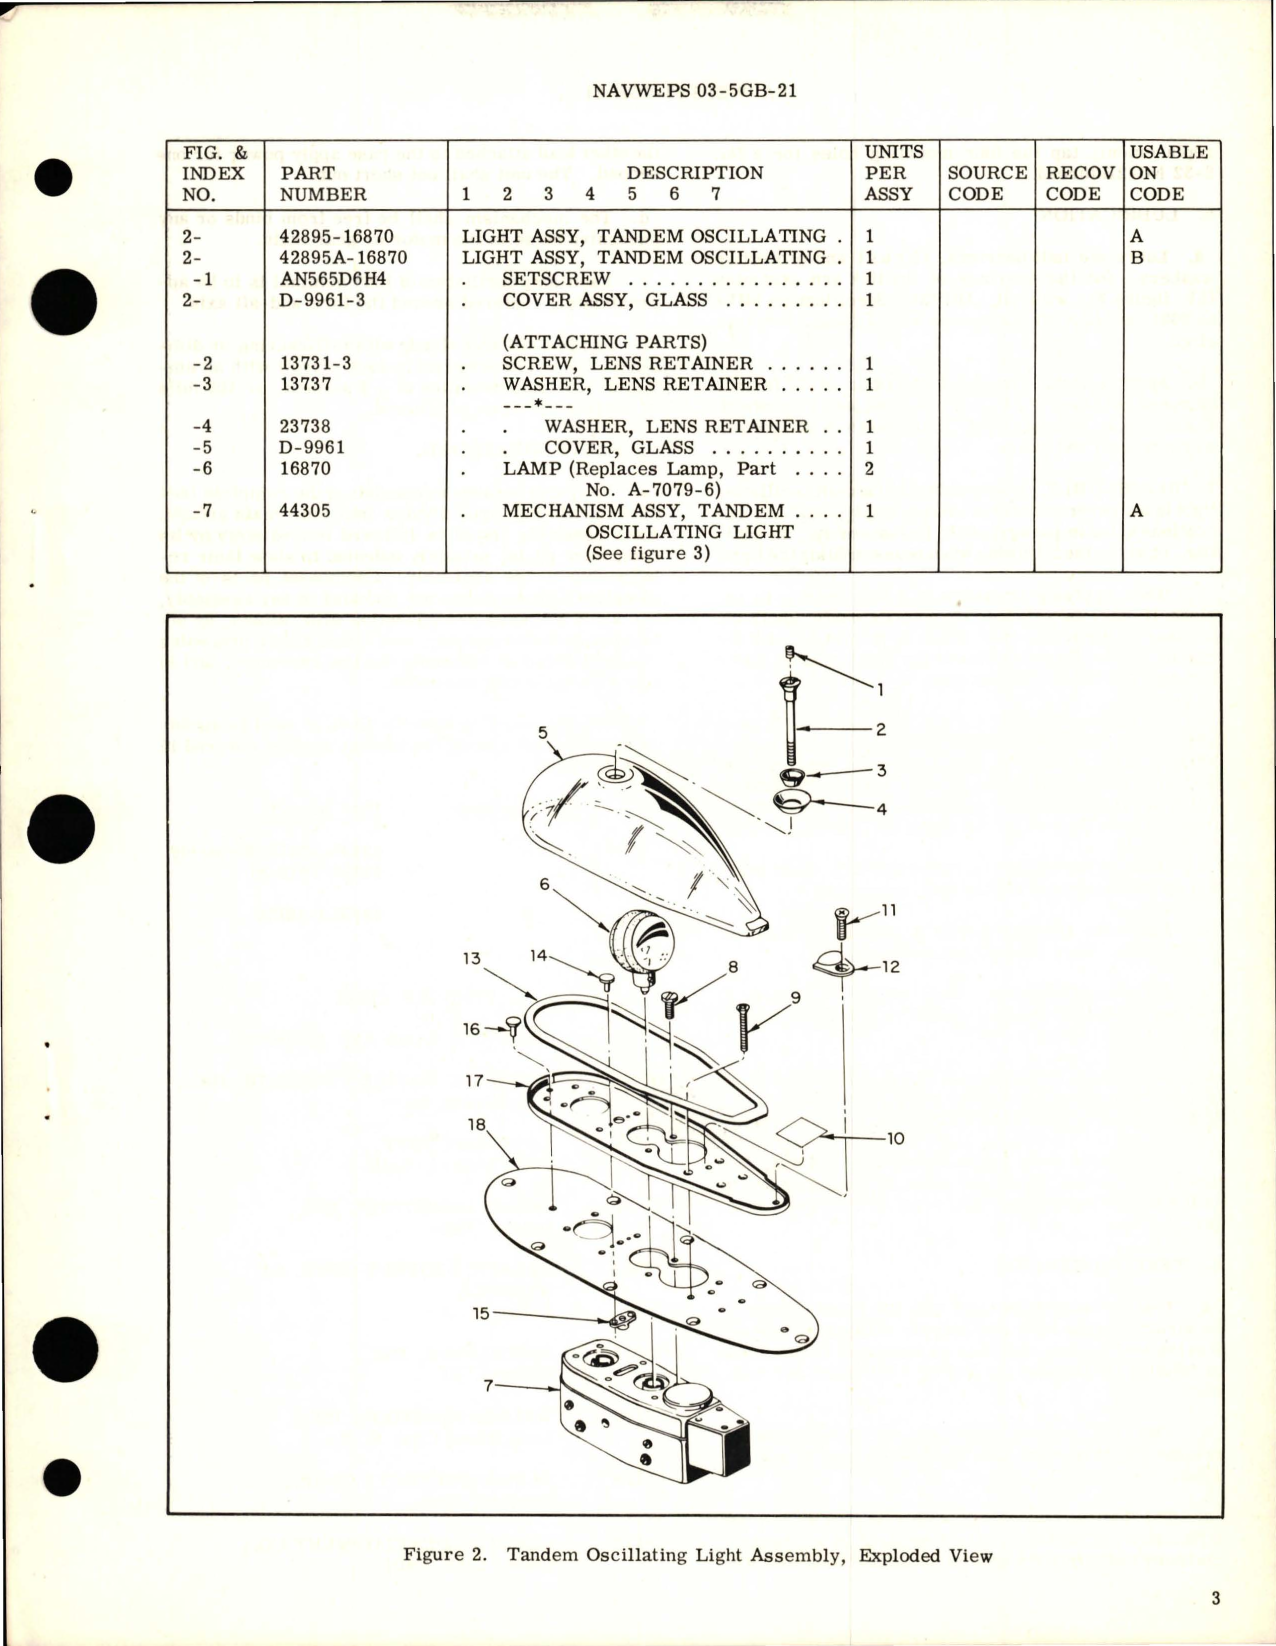 Sample page 5 from AirCorps Library document: Overhaul Instructions with Parts Breakdown for Tandem Oscillating Light - Parts 42895-16870, 42895-7079-6, and 42895A-16870 